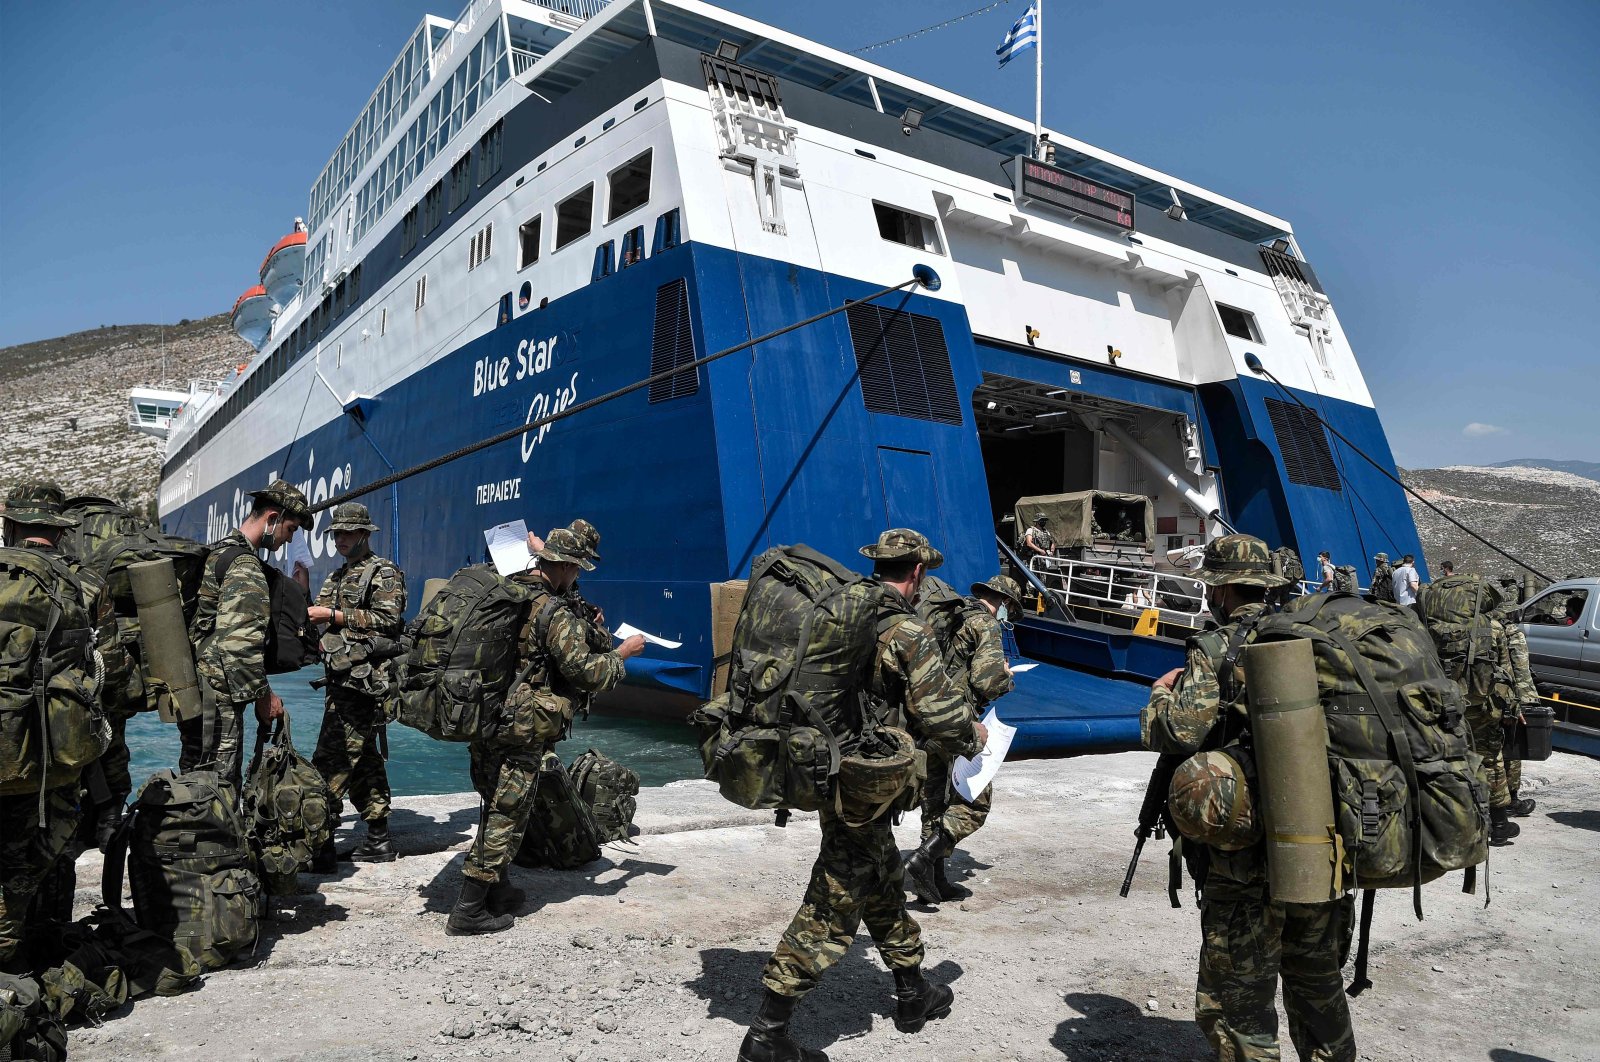 Greek soldiers prepare to board a ferry at the port of the tiny Greek island of Kastellorizo (Megisti-Meis), the most southeastern inhabited Greek island in the Dodecanese, situated two kilometers off the south coast of Turkey, Aug. 31, 2020. (AFP Photo)